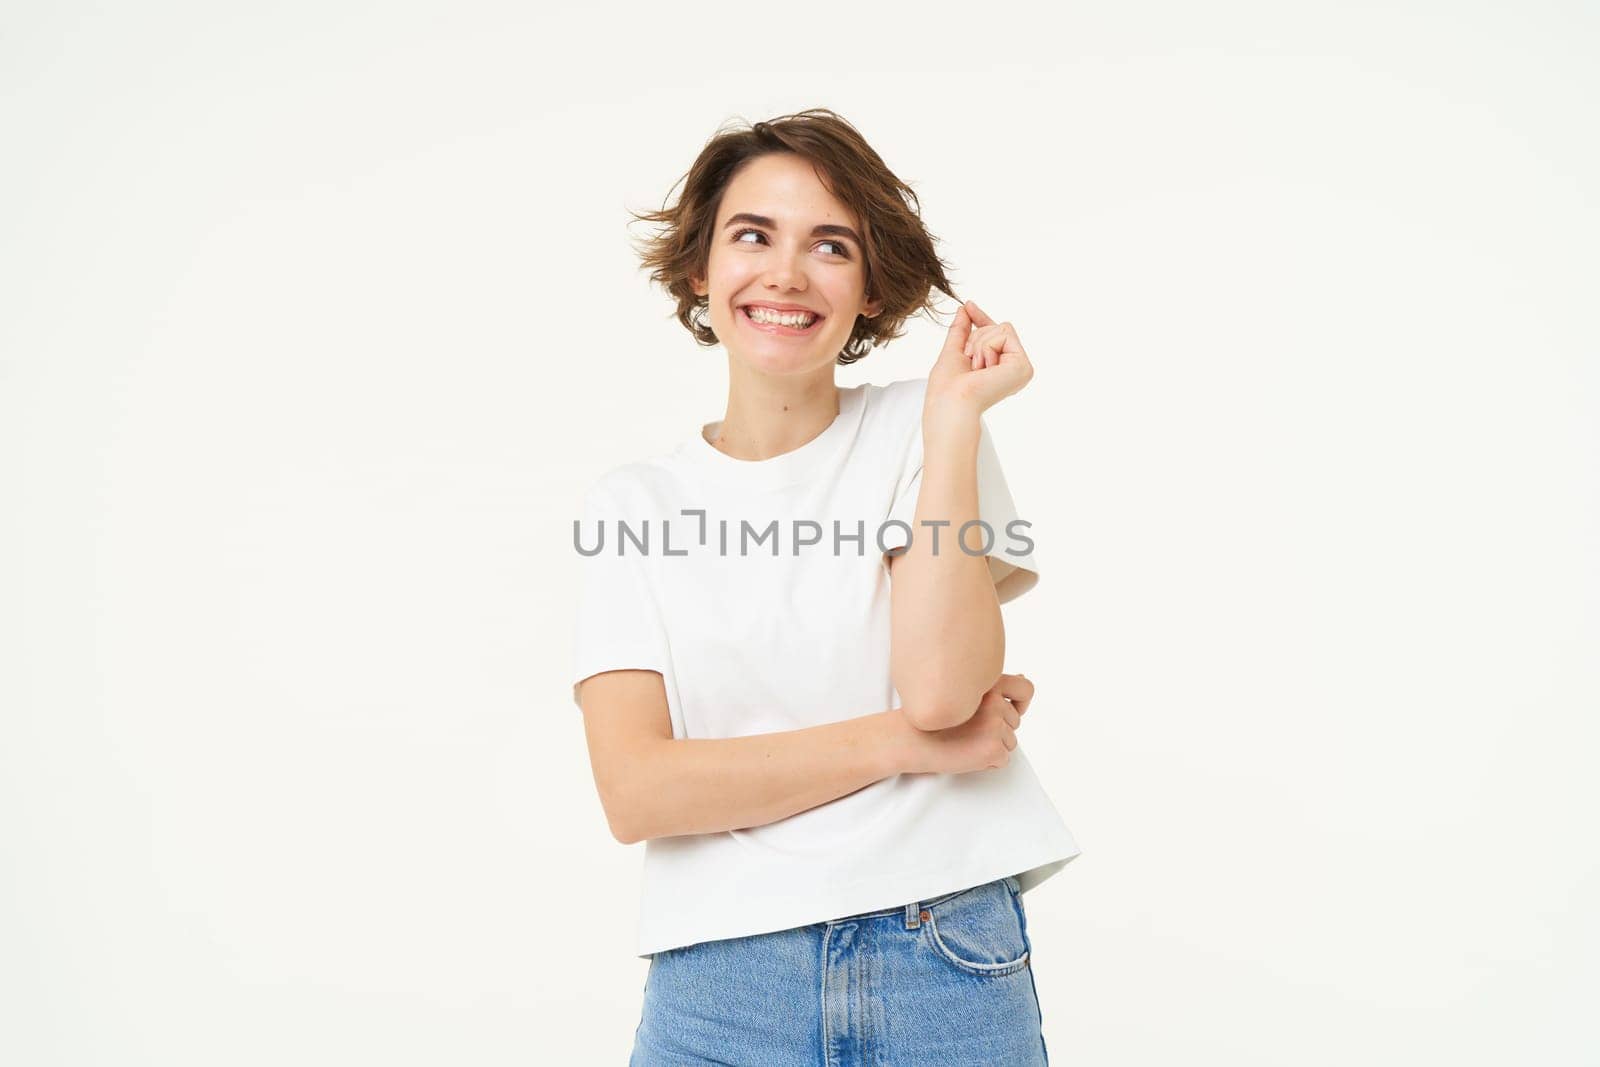 Portrait of confident woman with short hair, playing with strand, smiling and looking aside with thoughtful look, standing over white background. Copy space